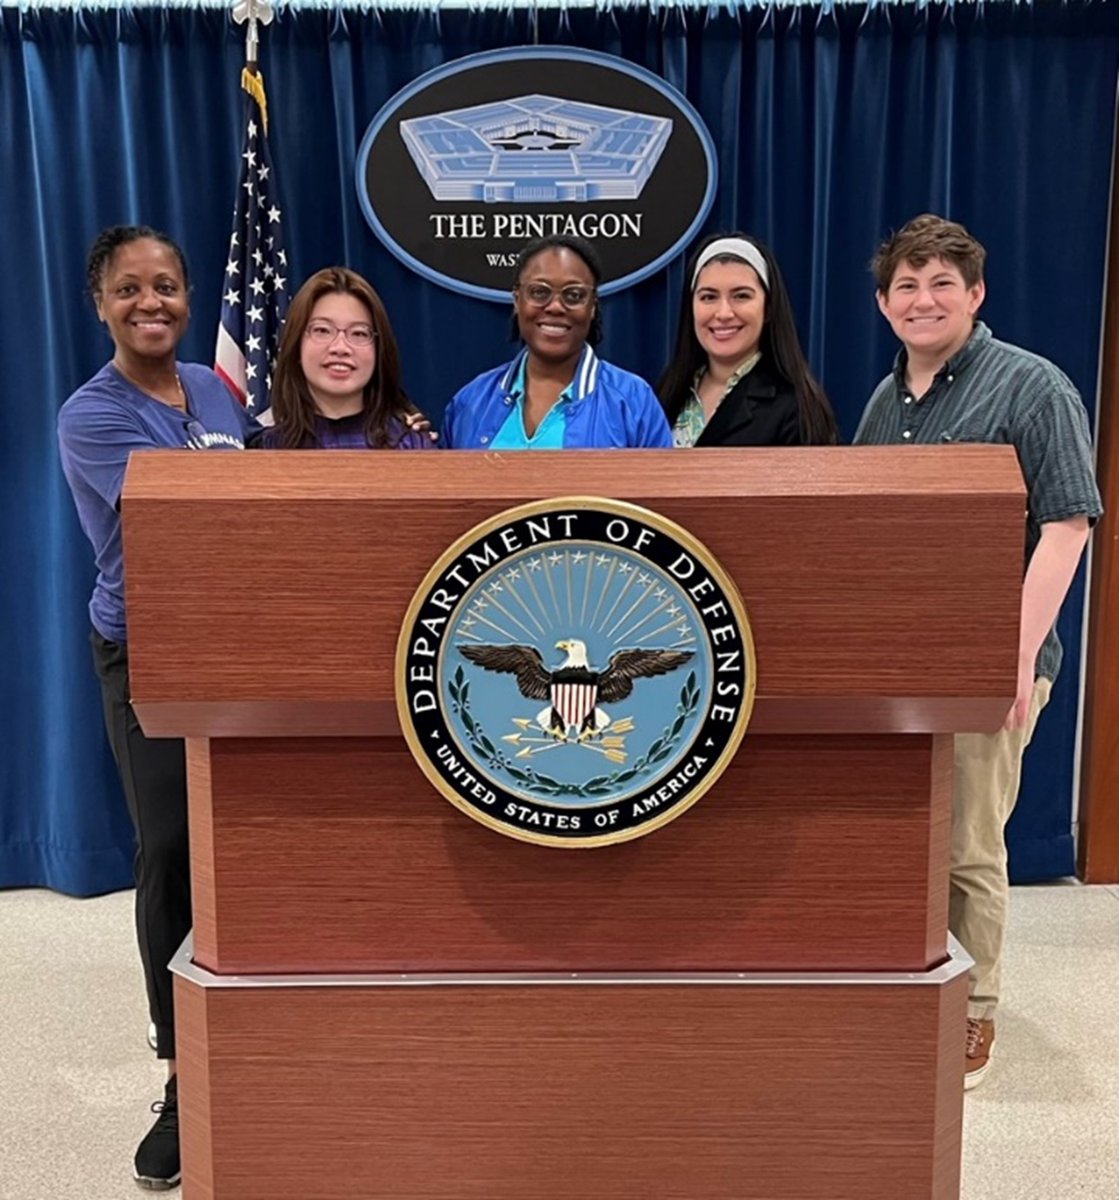 The Fellows kicked off their DC adventure with a Pentagon tour! 🏛️

Follow along as they develop connections and dive into meaningful experiences. #WashingtonDC  #HeadStartFellowship